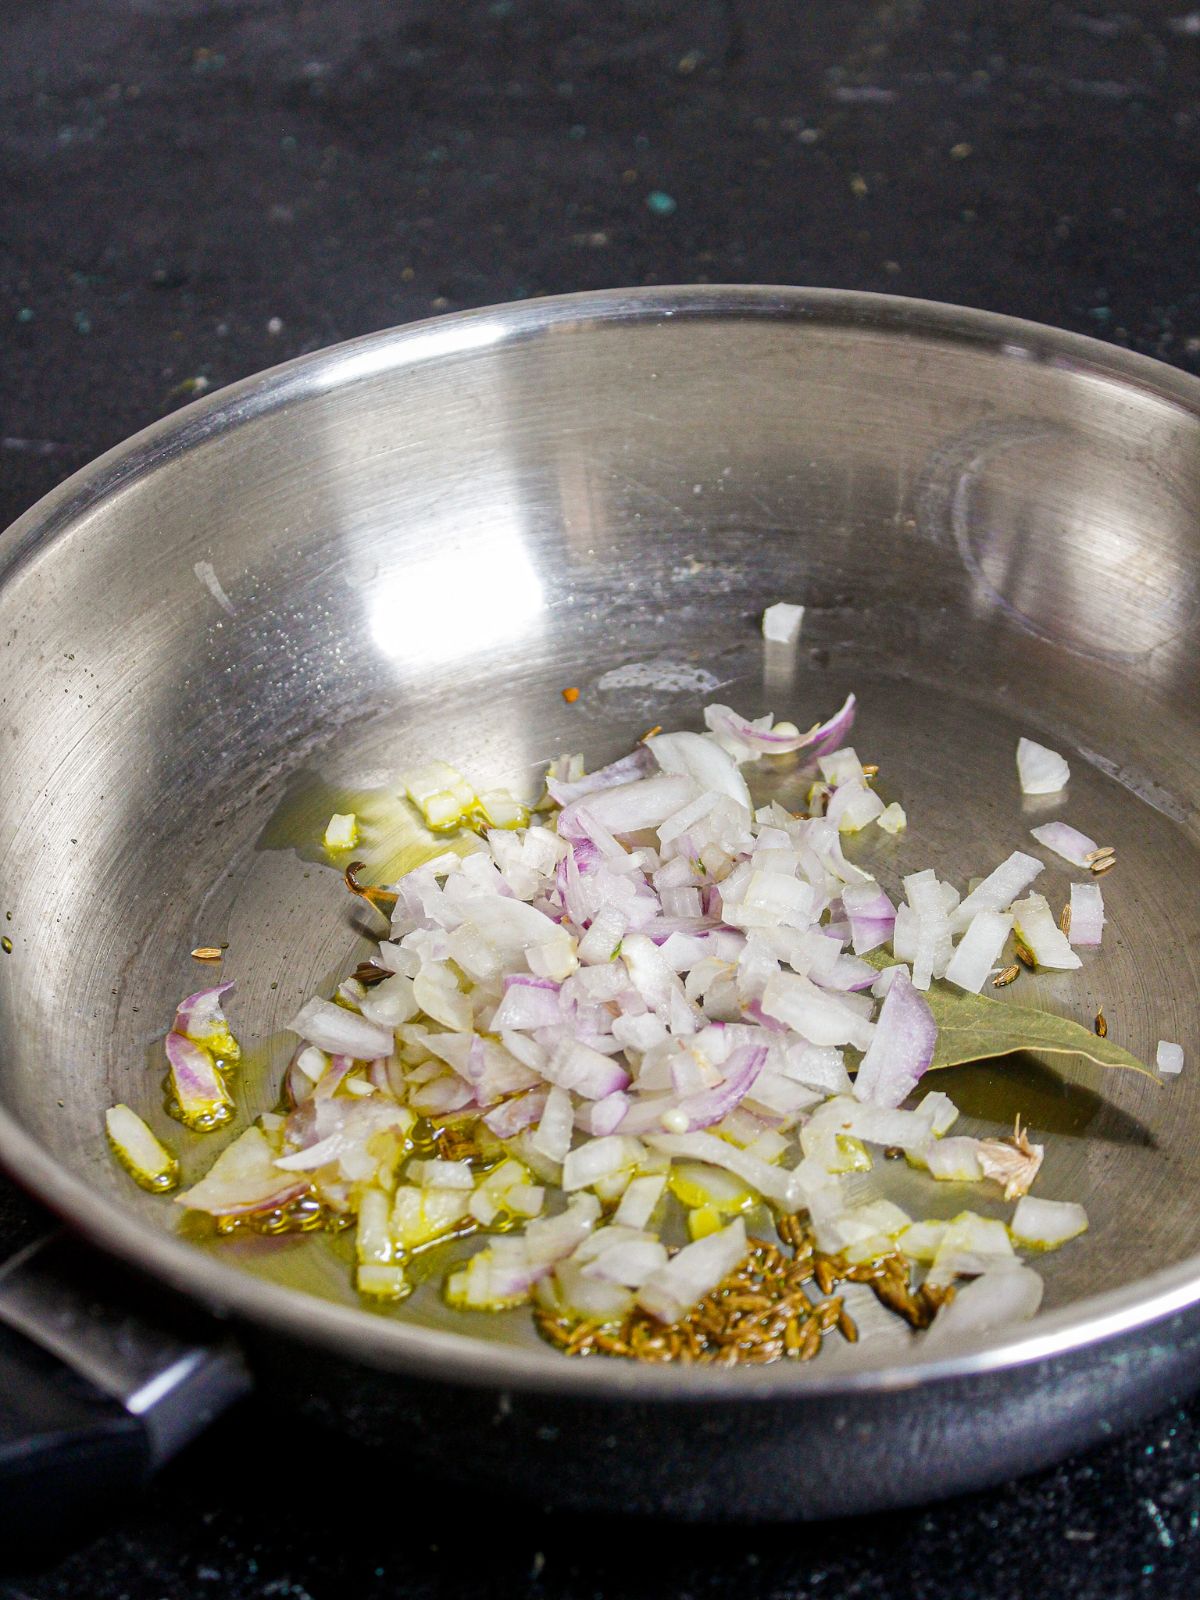 Add chopped onions to the saute 